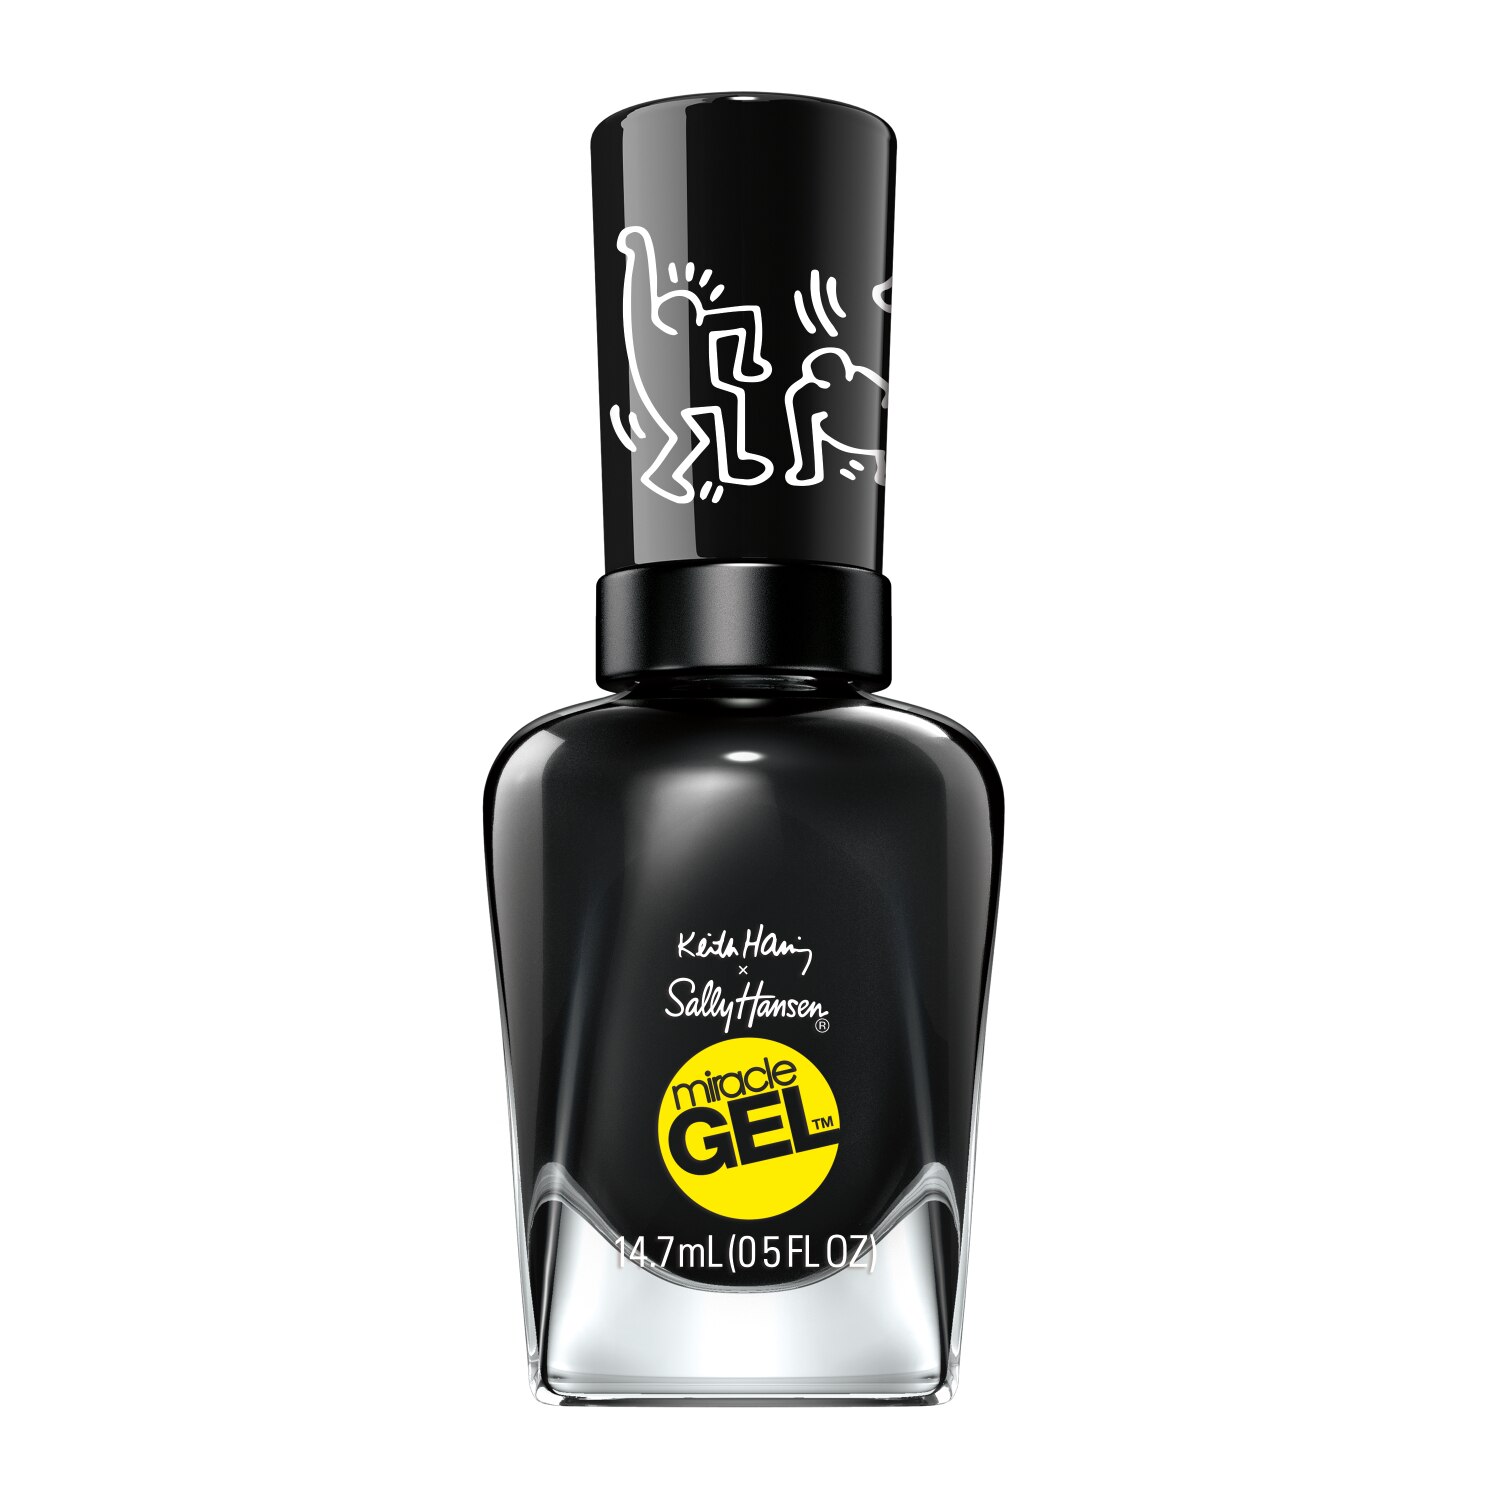 Sally Hansen Miracle Gel x Keith Haring Collection